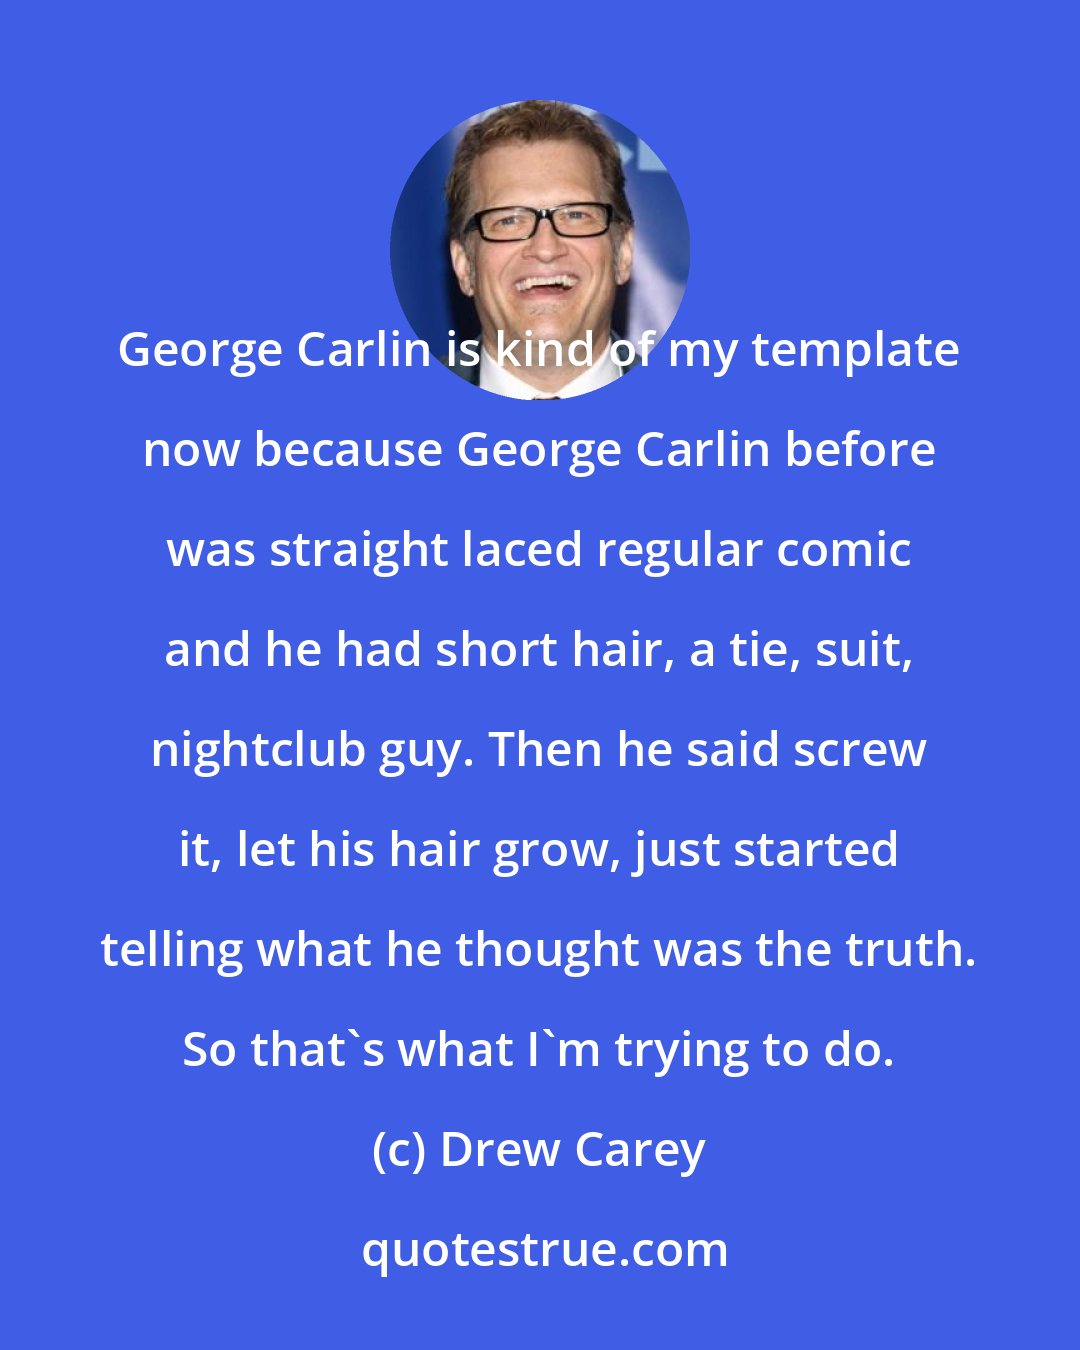 Drew Carey: George Carlin is kind of my template now because George Carlin before was straight laced regular comic and he had short hair, a tie, suit, nightclub guy. Then he said screw it, let his hair grow, just started telling what he thought was the truth. So that's what I'm trying to do.